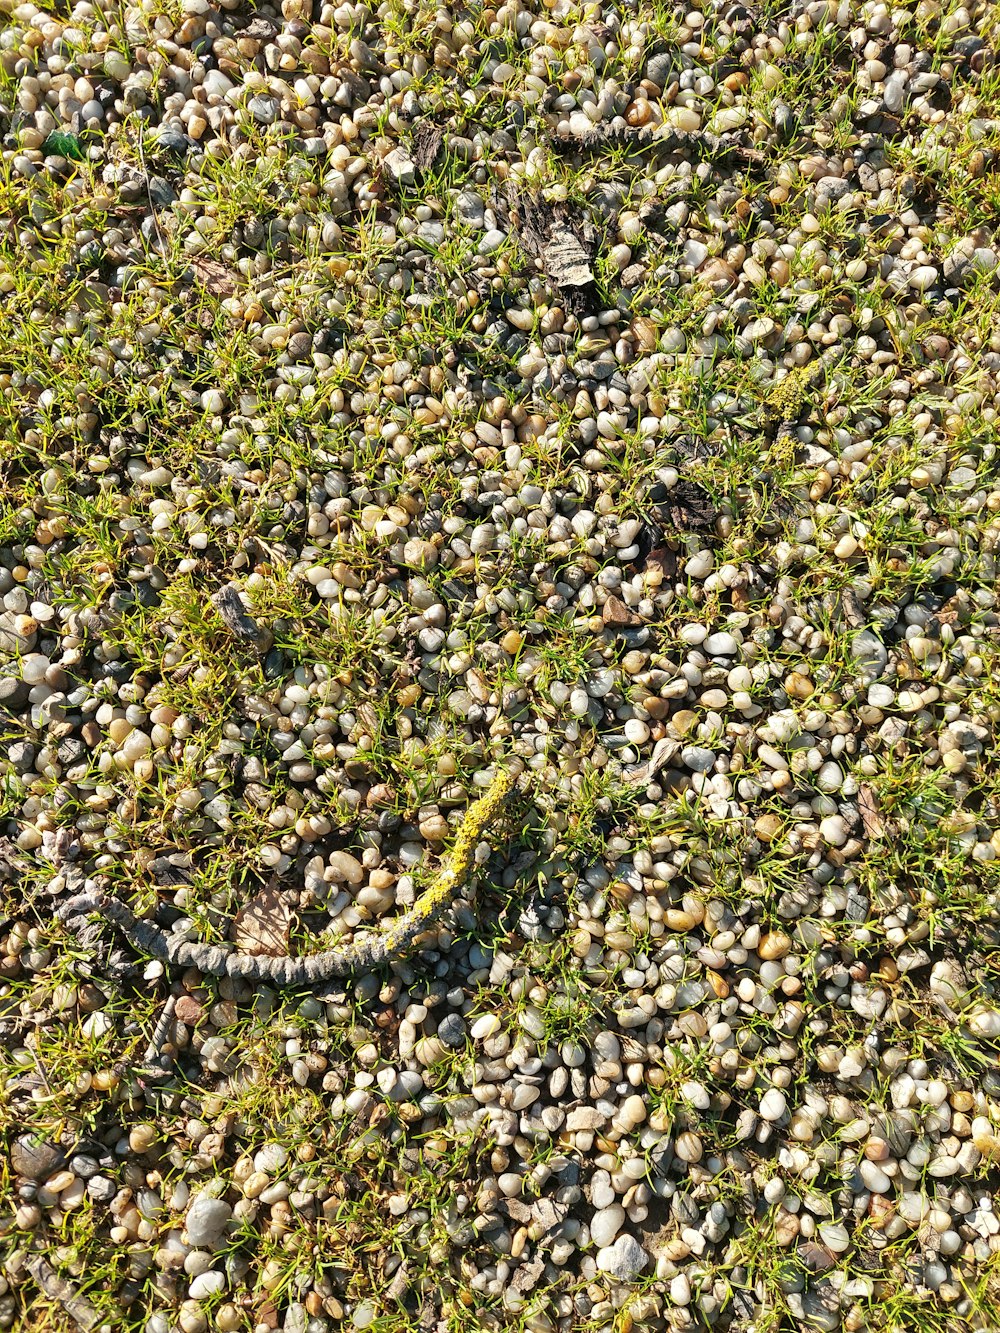 a snake in the middle of a field of rocks